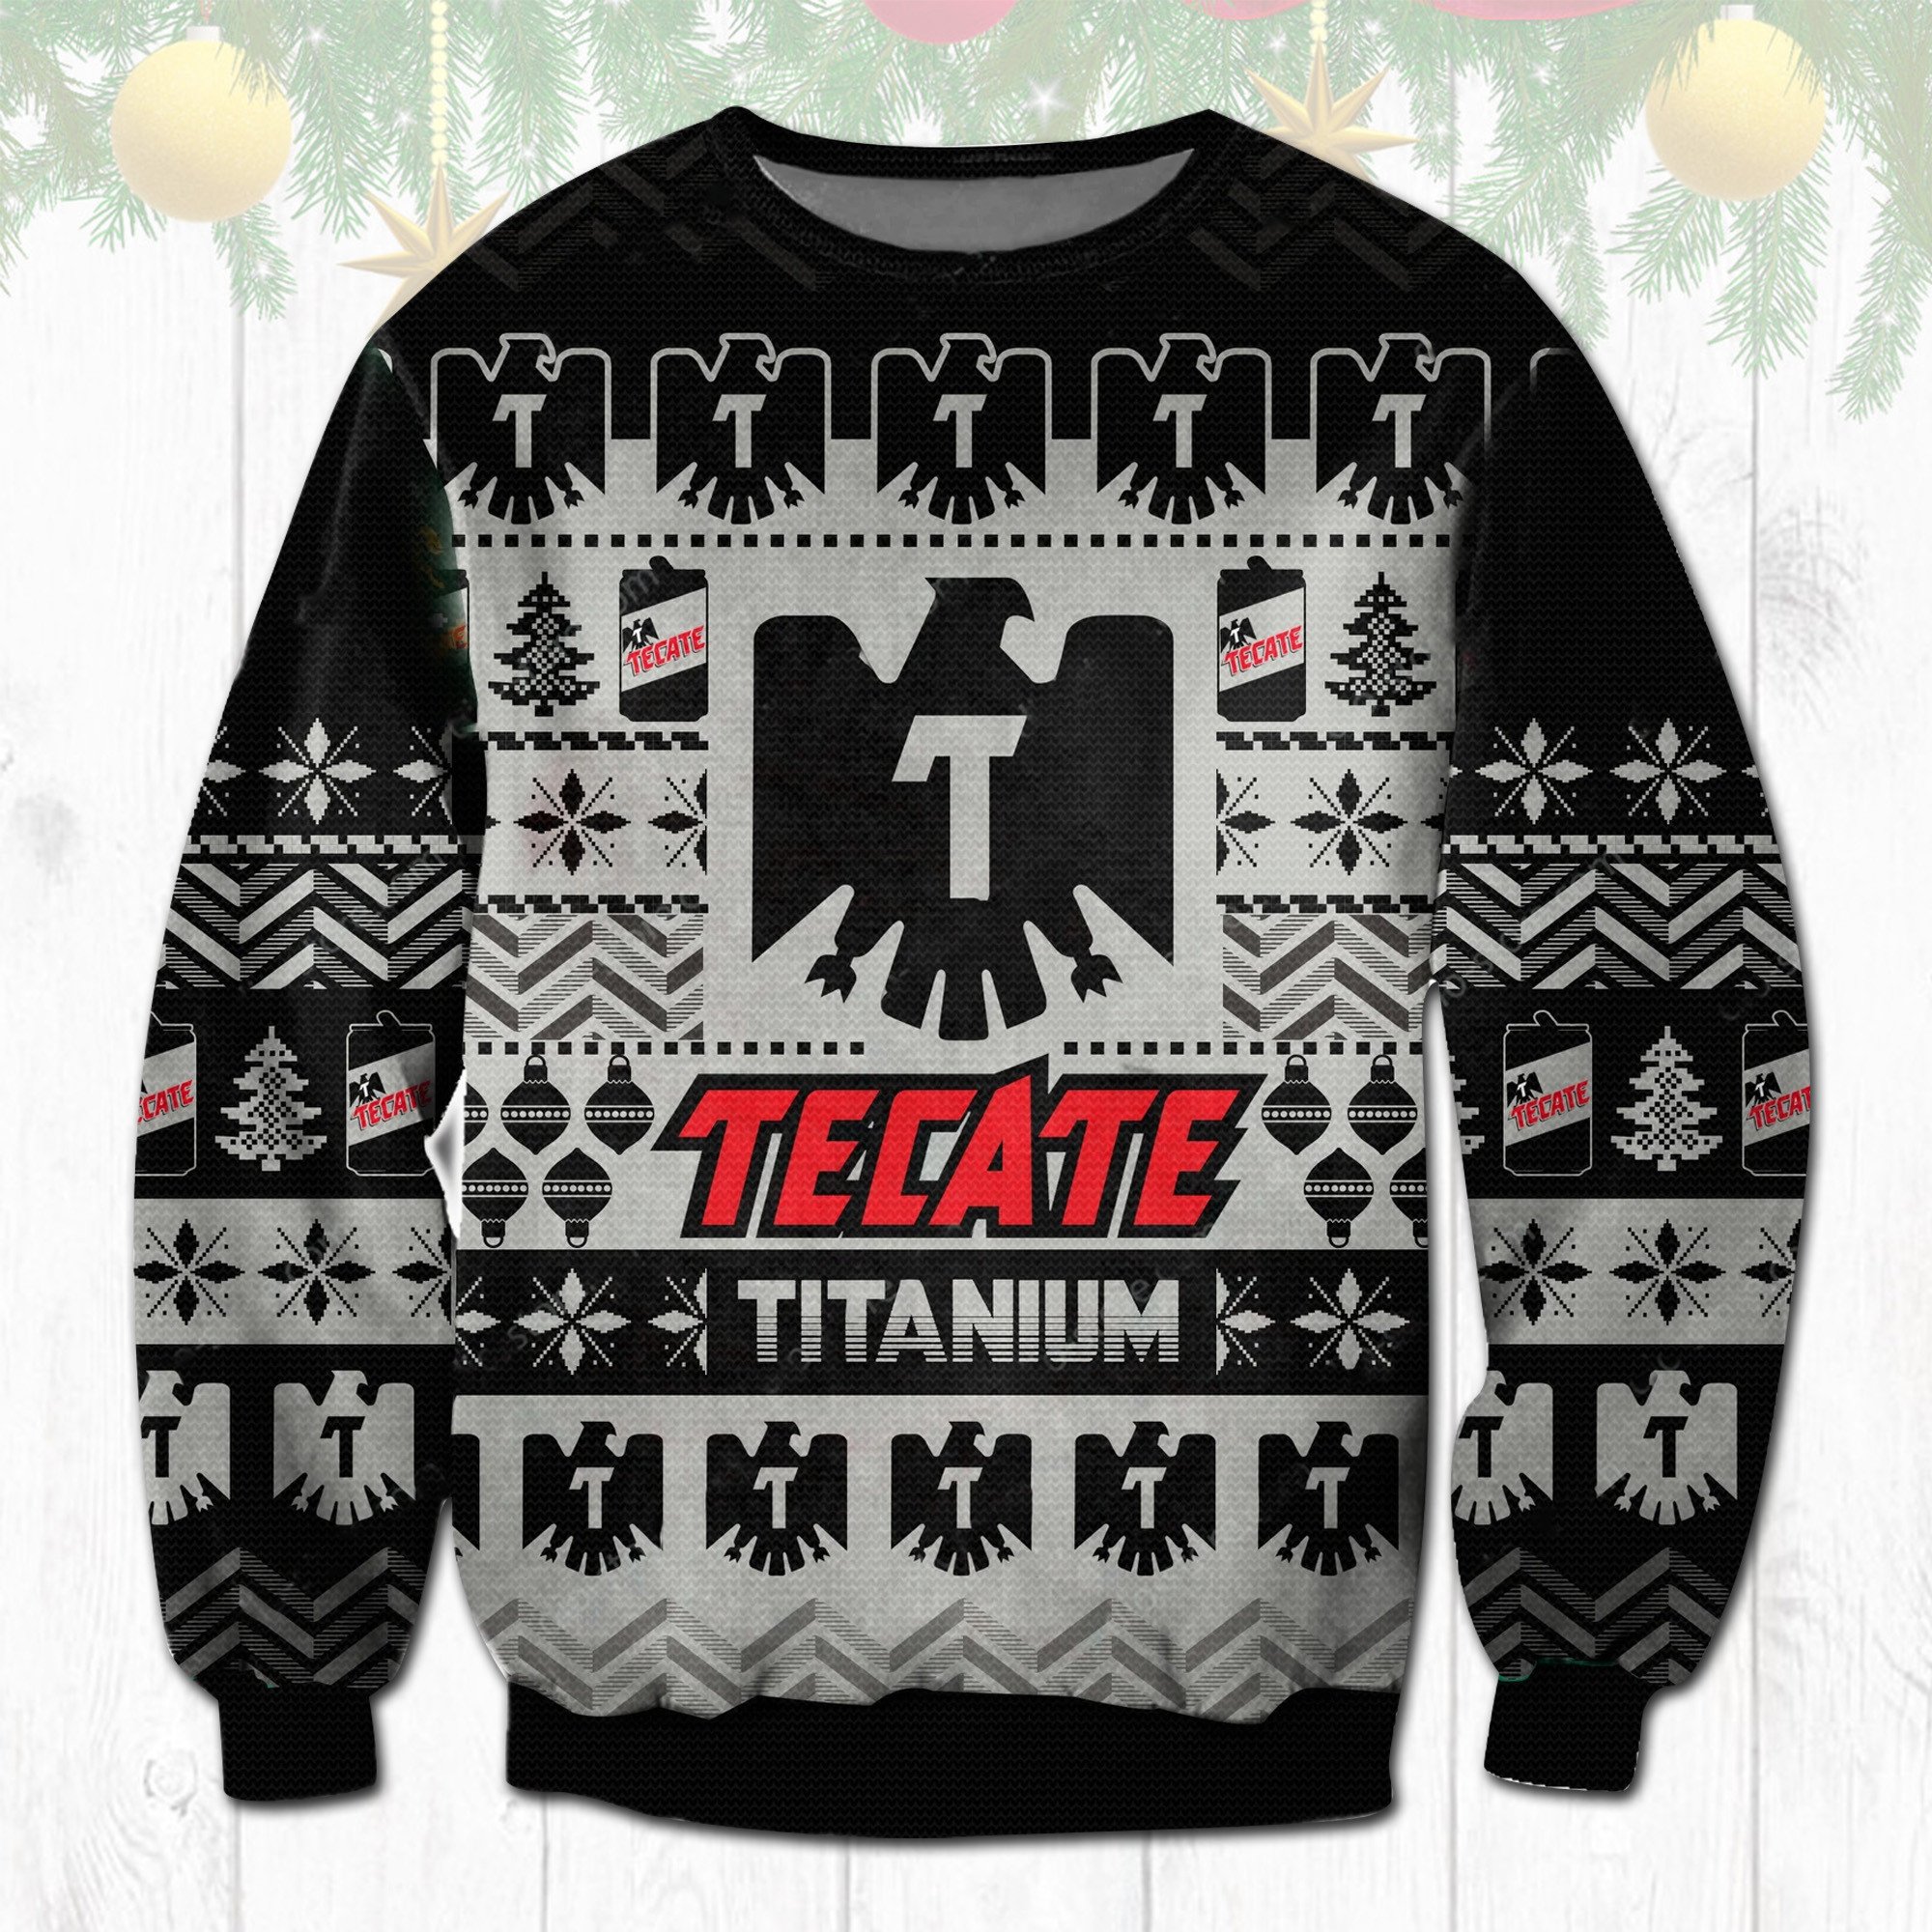 HOT Tecate Titanium Beer ugly Christmas sweater 9